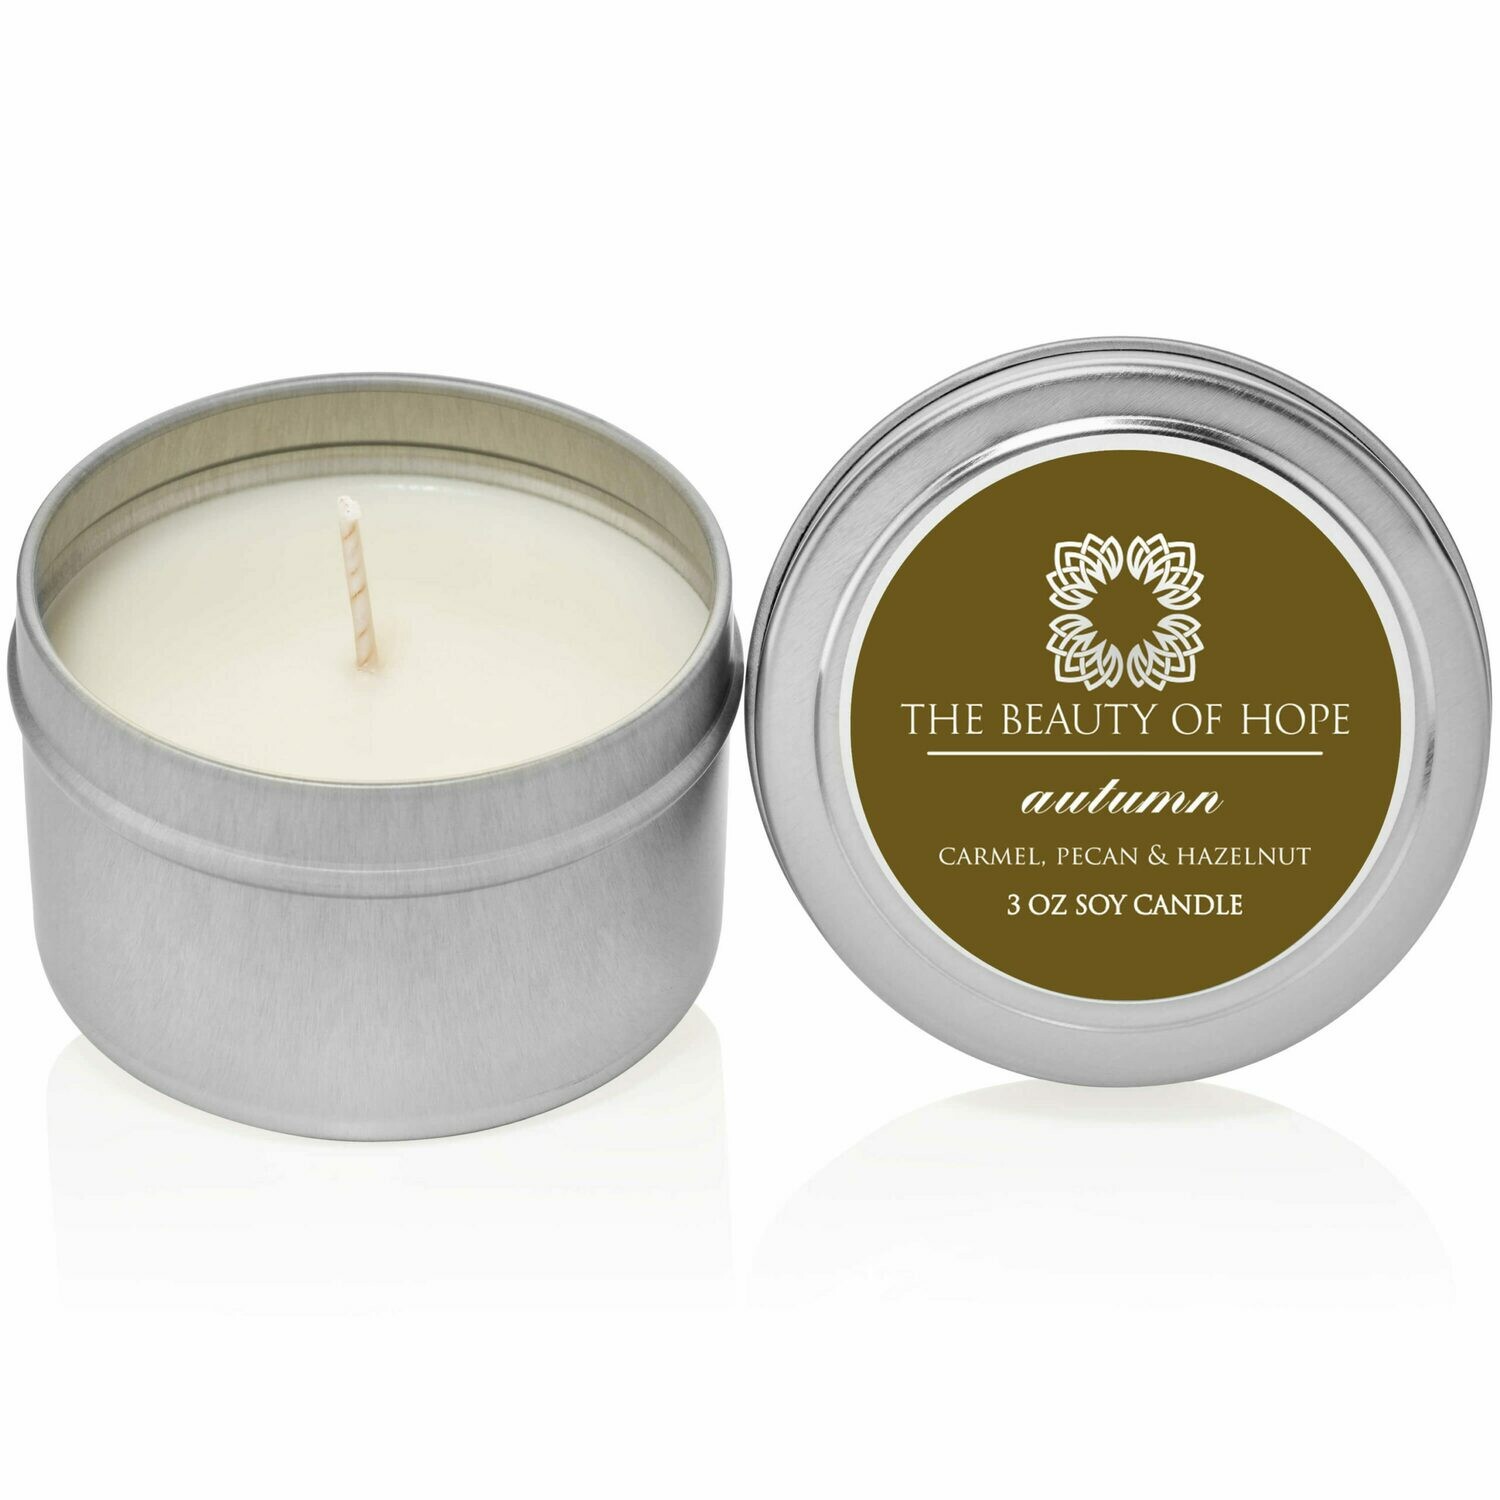 Autumn (3oz) Candle By The Beauty Of Hope